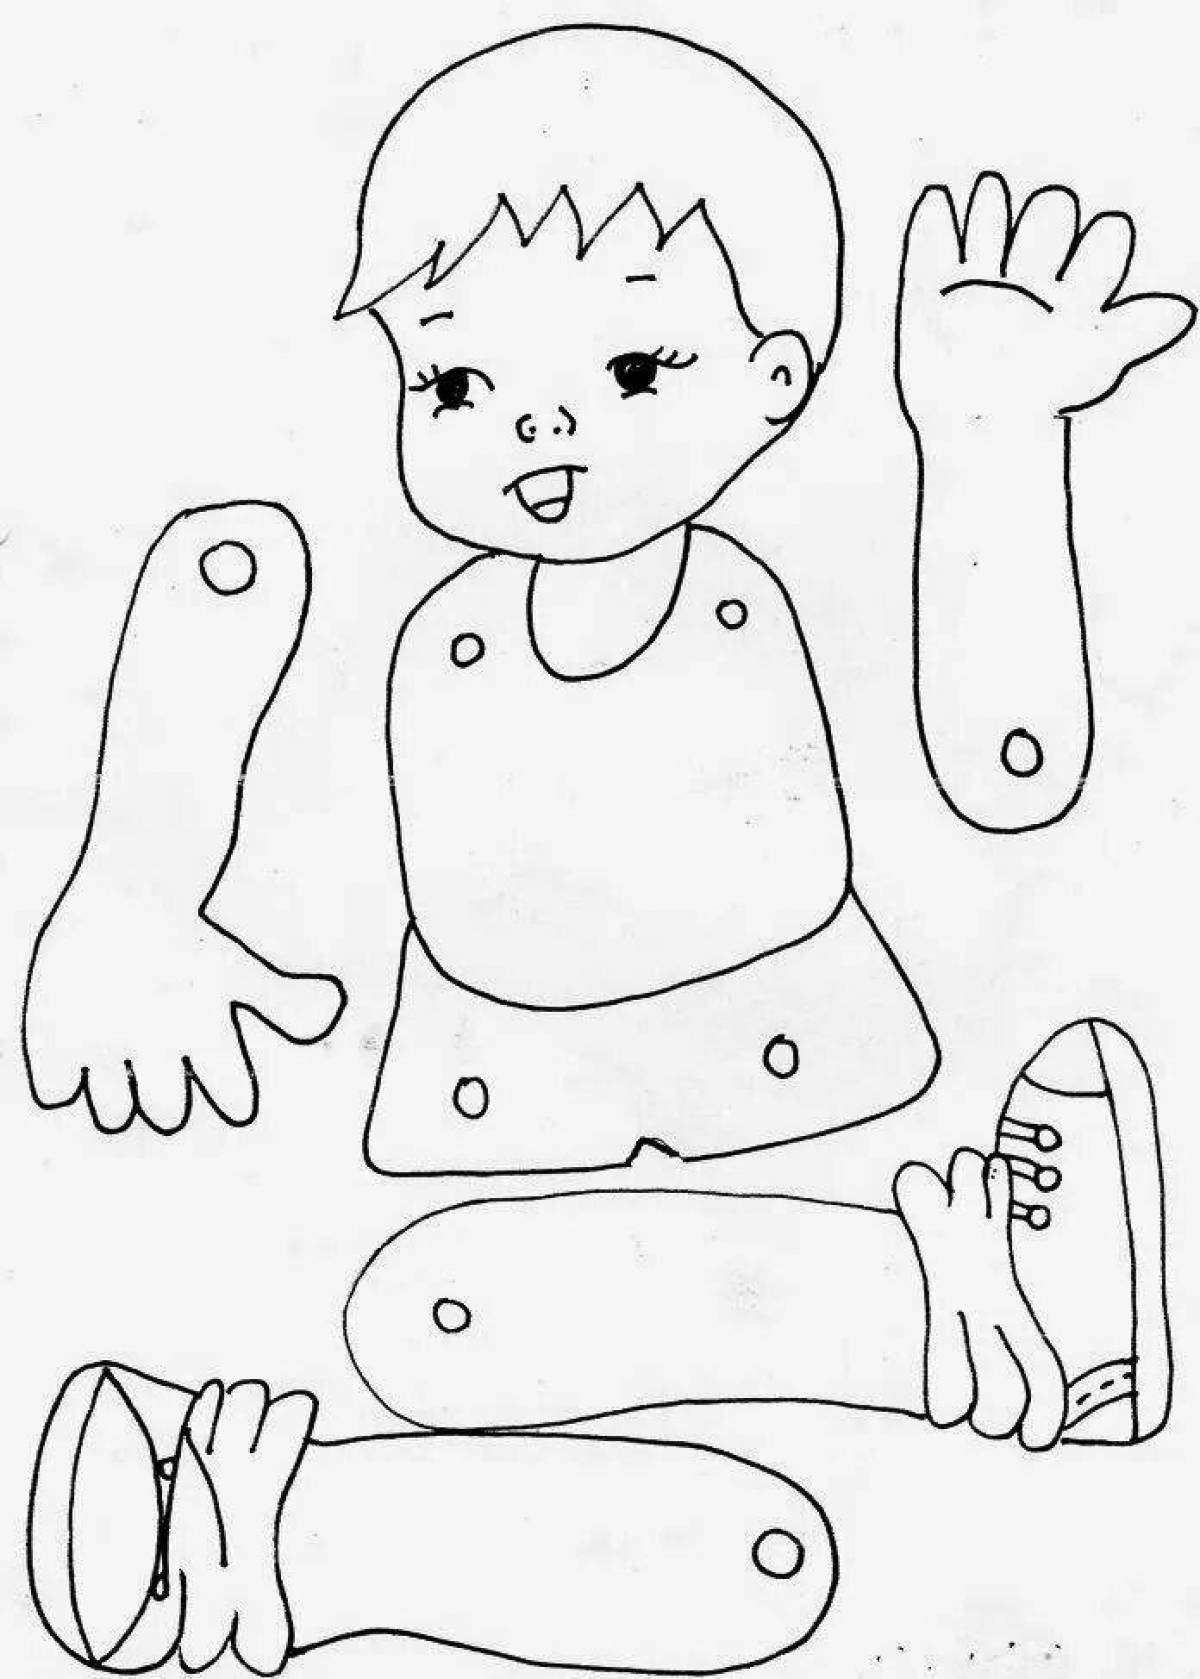 Fun coloring of human body parts for toddlers